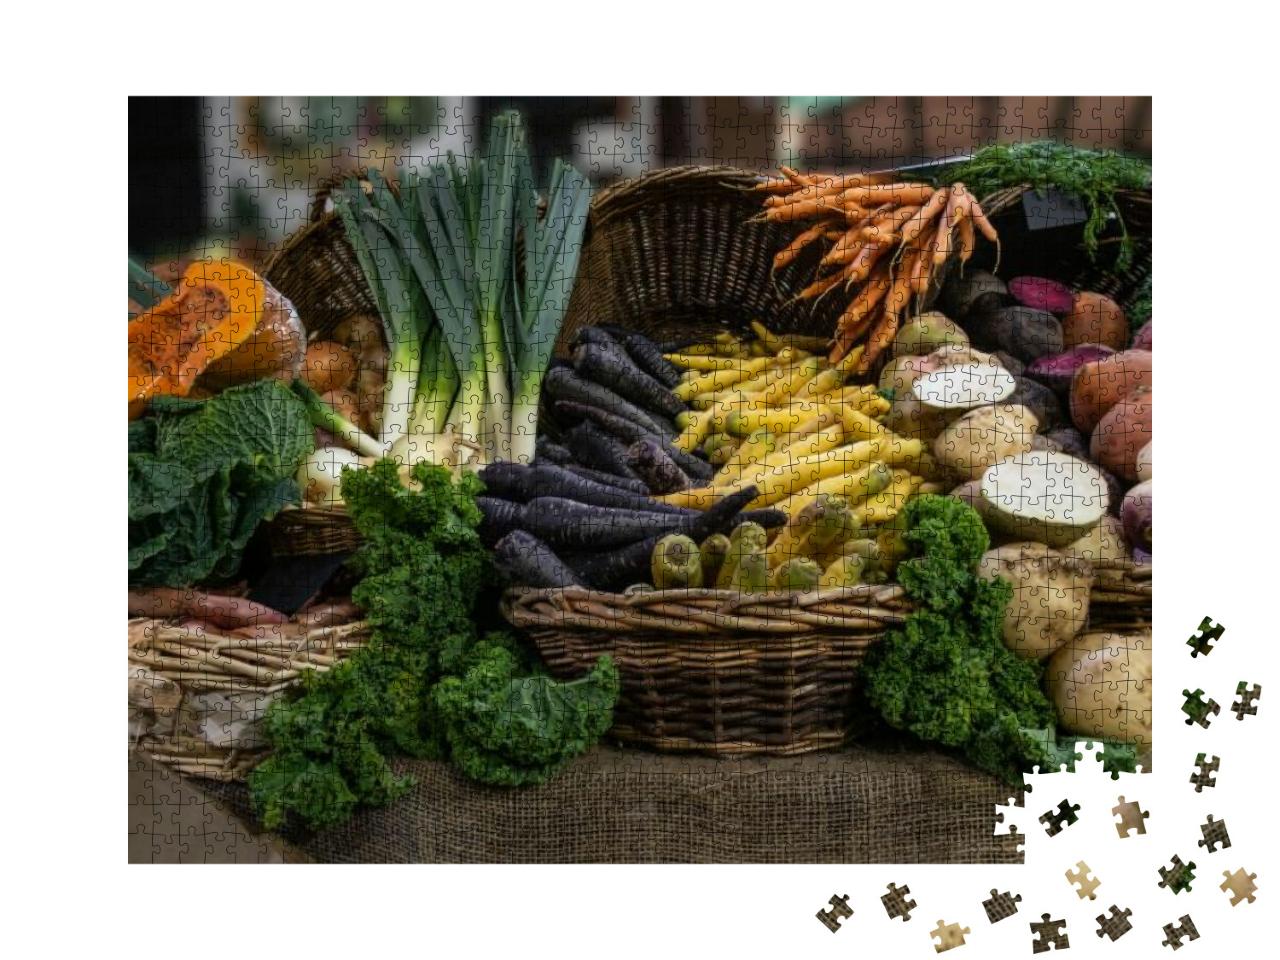 Fresh Harvest Vegetables in London's Borough Market, Uk... Jigsaw Puzzle with 1000 pieces